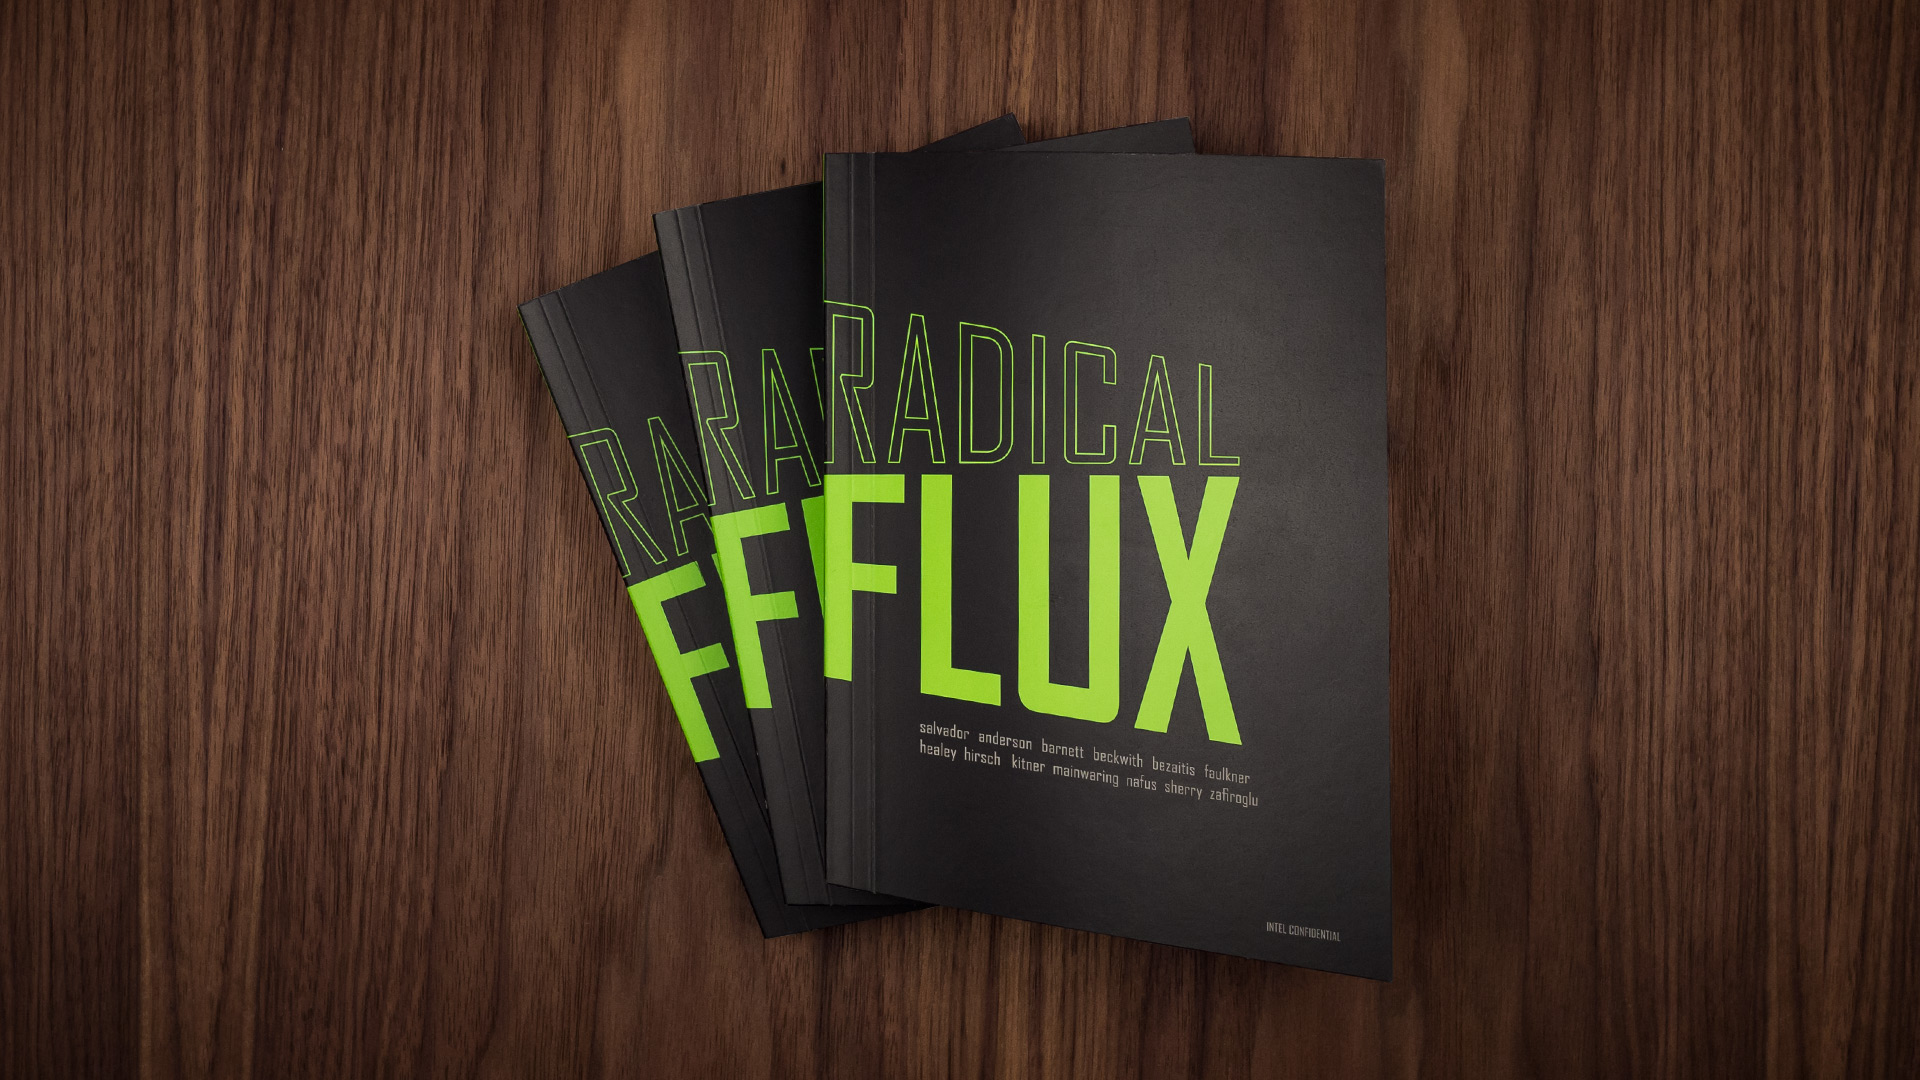 Cover design from Intel's Radical Flux book design created by Incubate Design